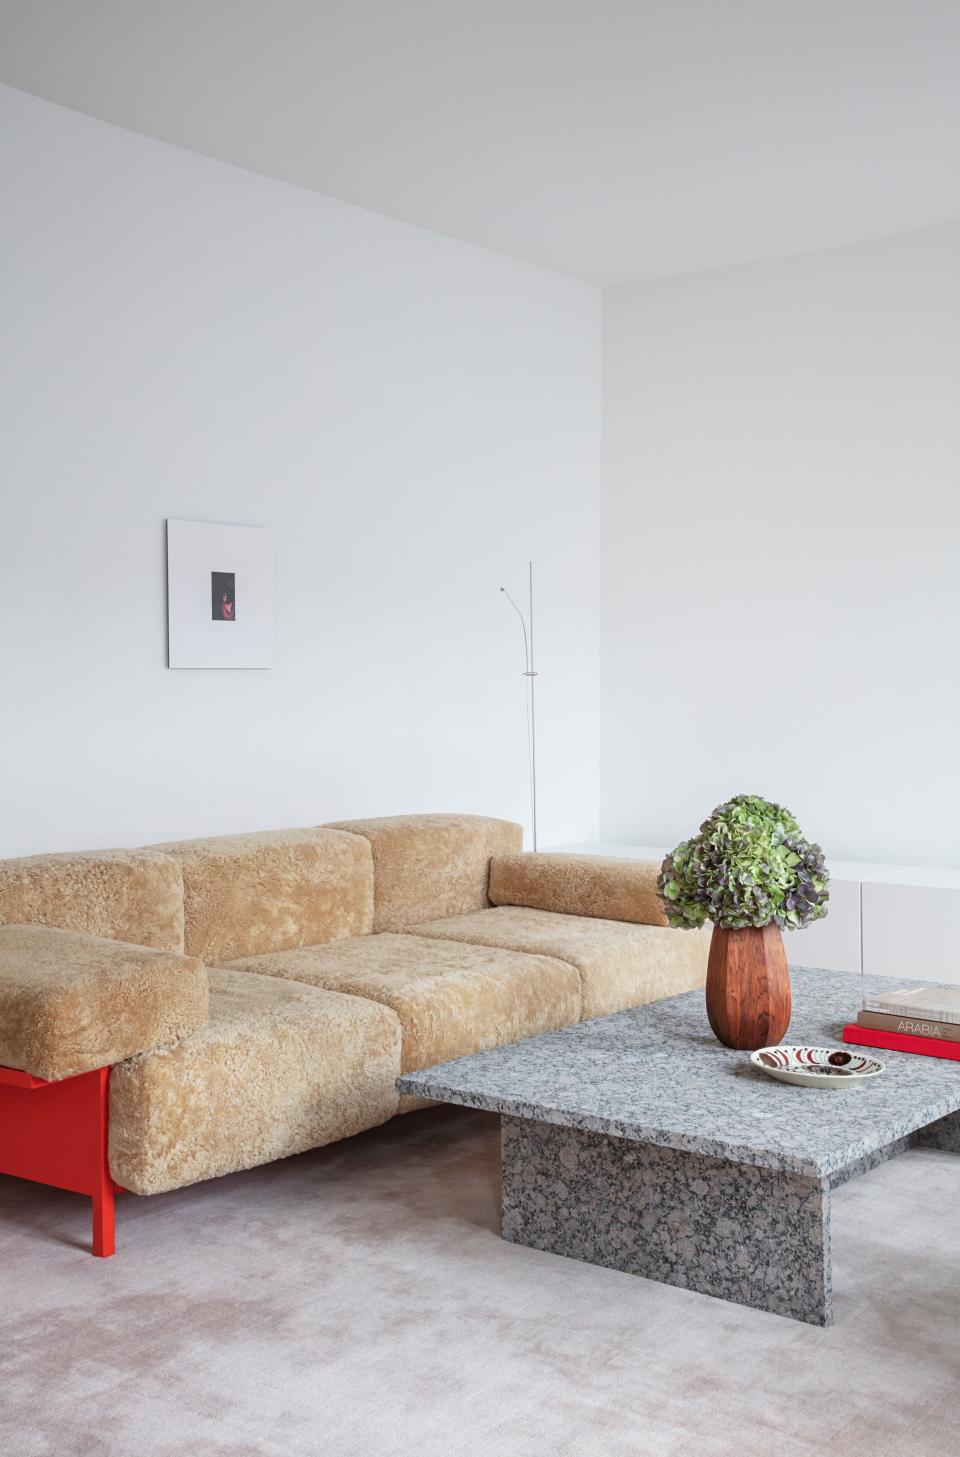 In the living room, the sheepskin-covered sofa is Thulstrup’s Mooner design for Common Seating, the granite cocktail table was custom made, and the rug is by Massimo.